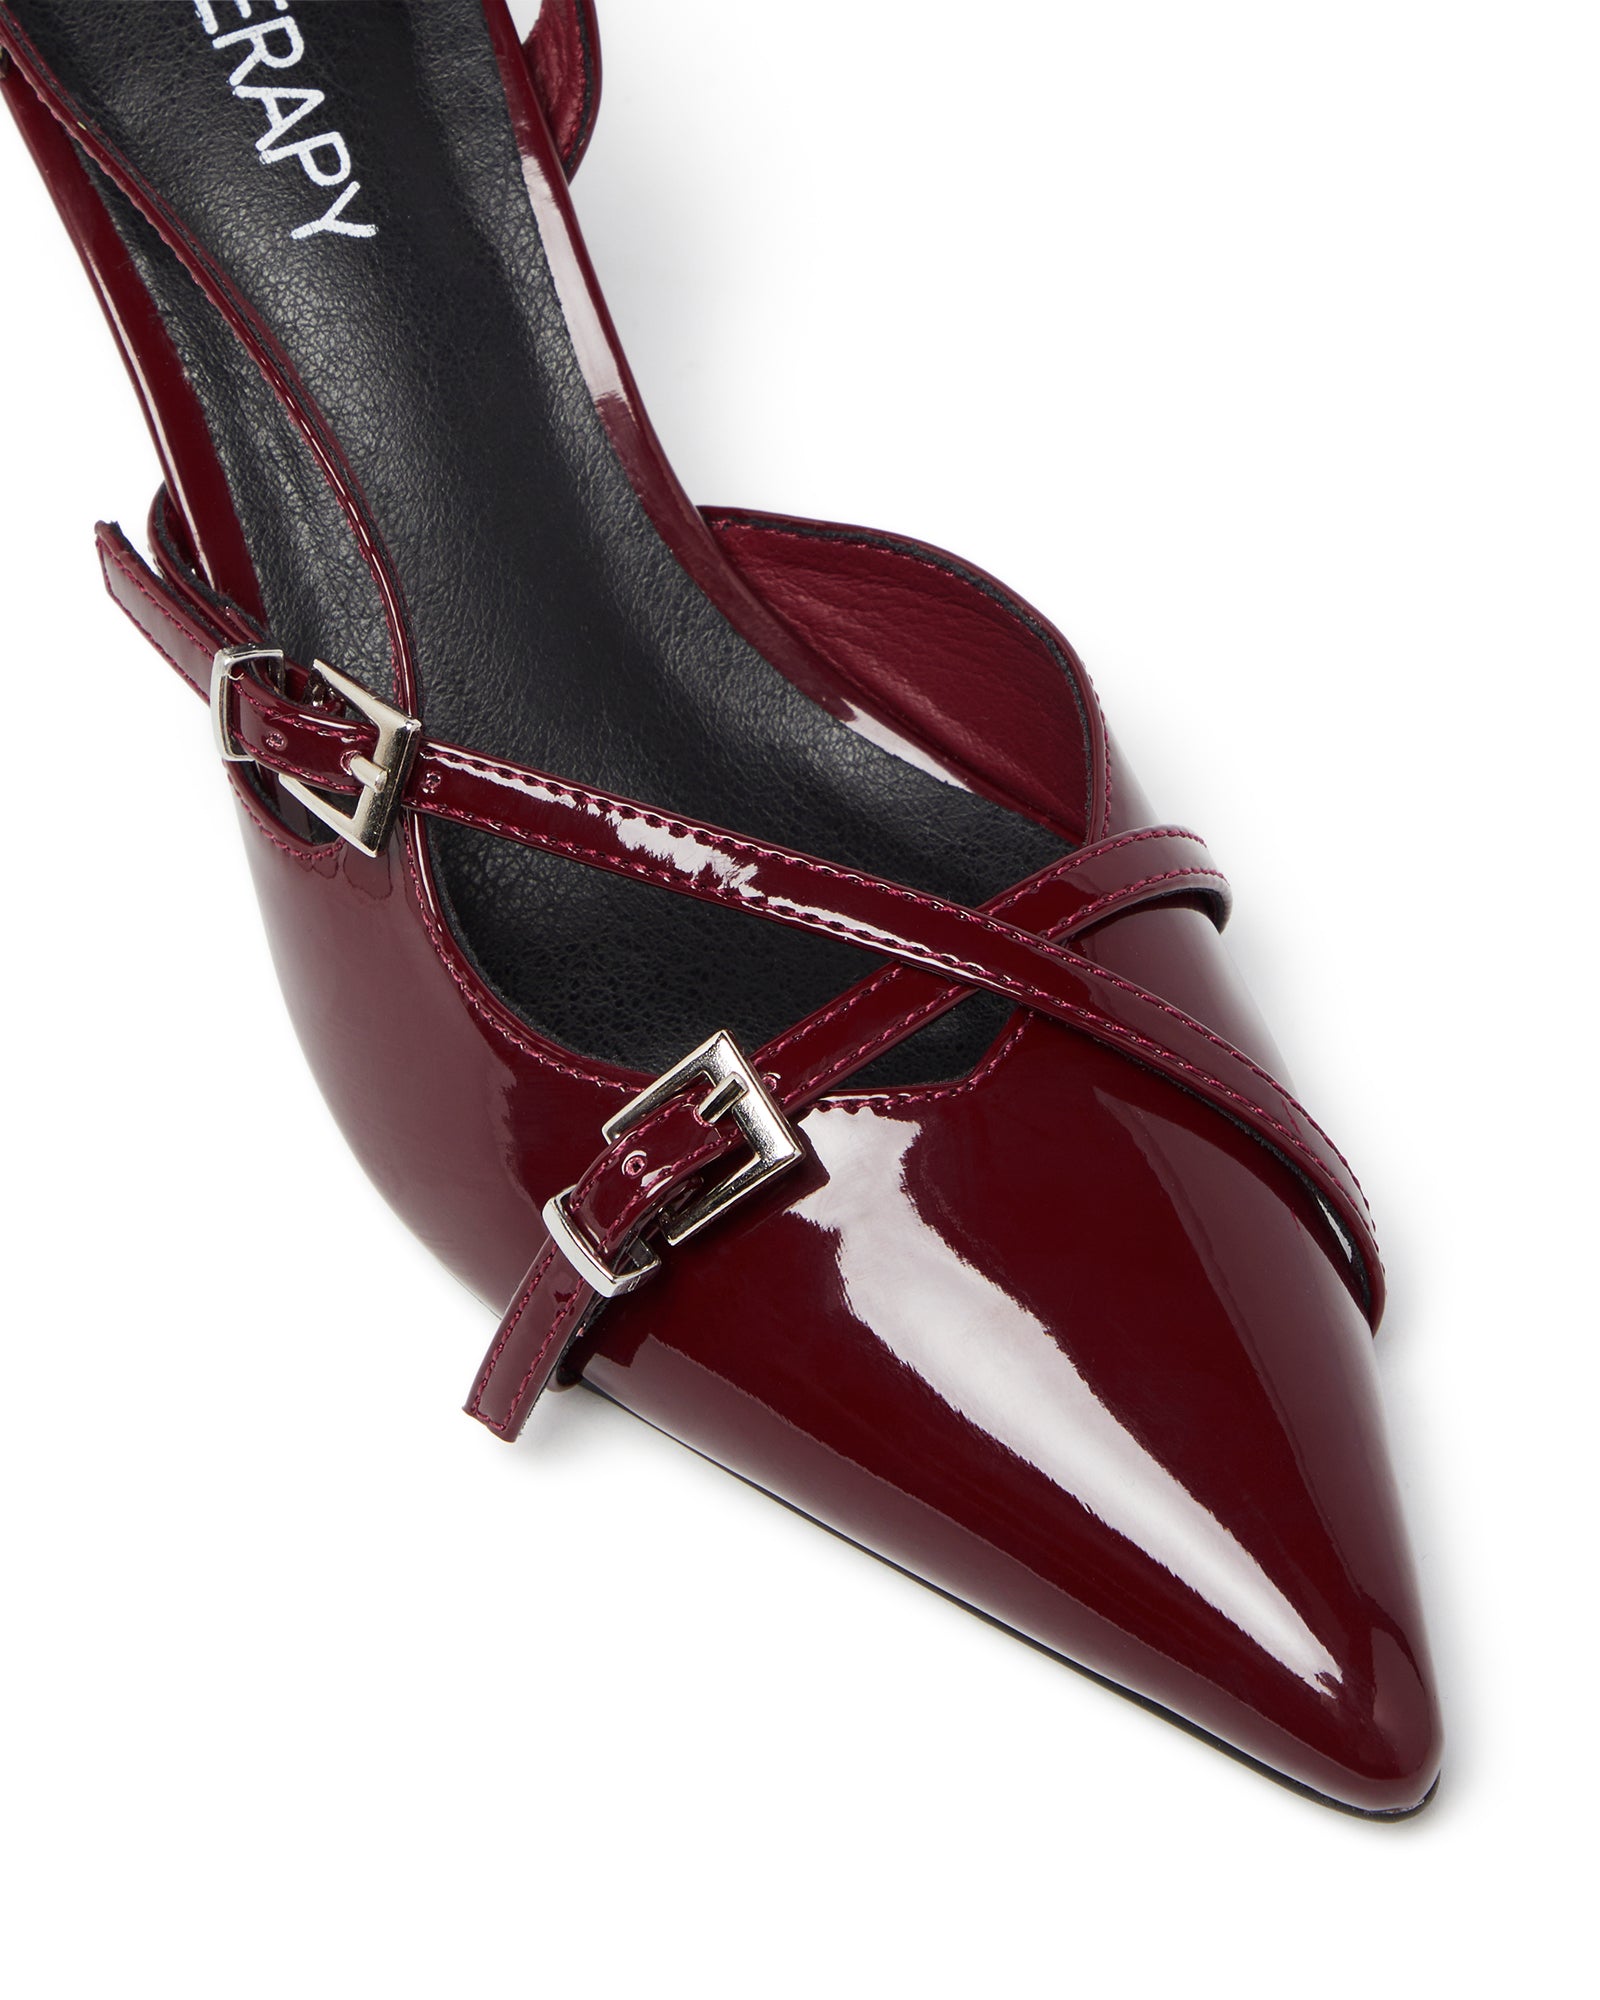 Therapy Shoes Juicy Cherry Patent | Women's Heels | Slingback | Pump | Stiletto